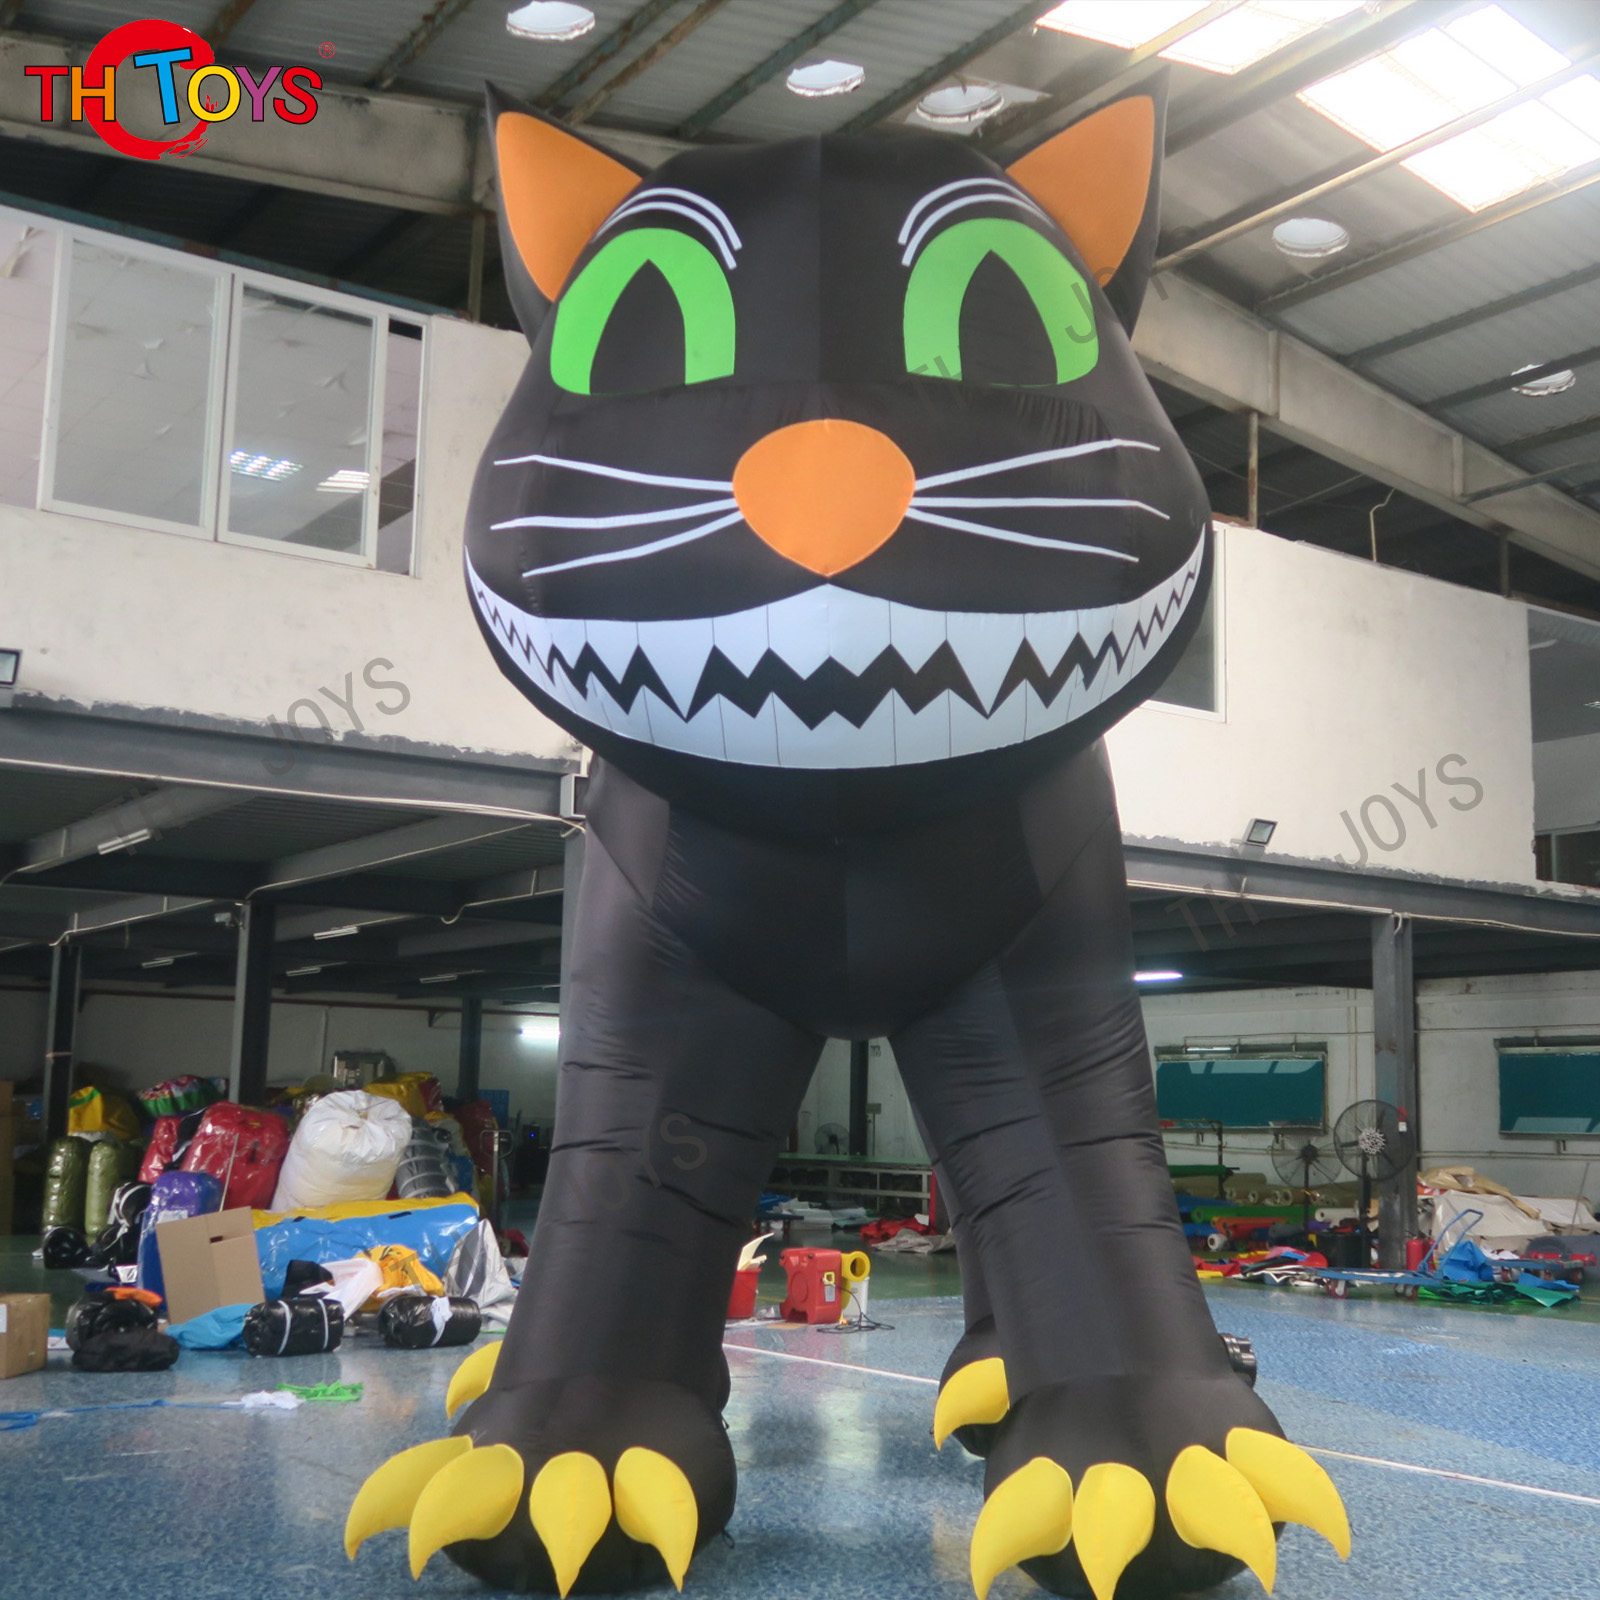 customize color Halloween yard decoration inflatable black cat night party event ideas